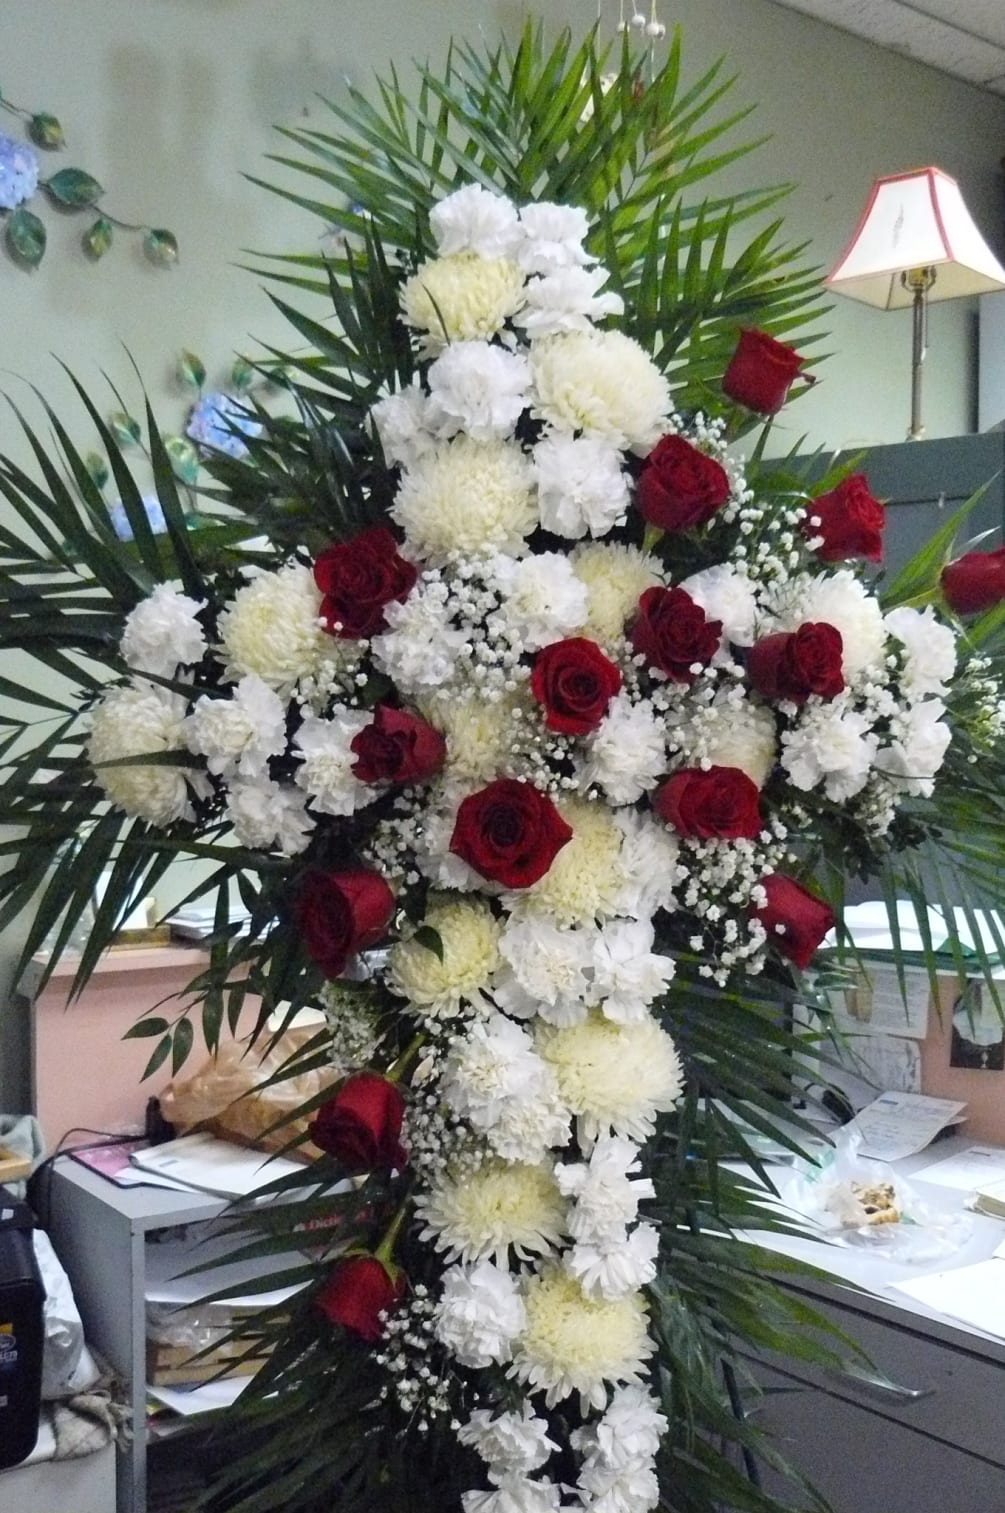 Pictured is a  Cross  designed with  Mums, Spiders, Roses